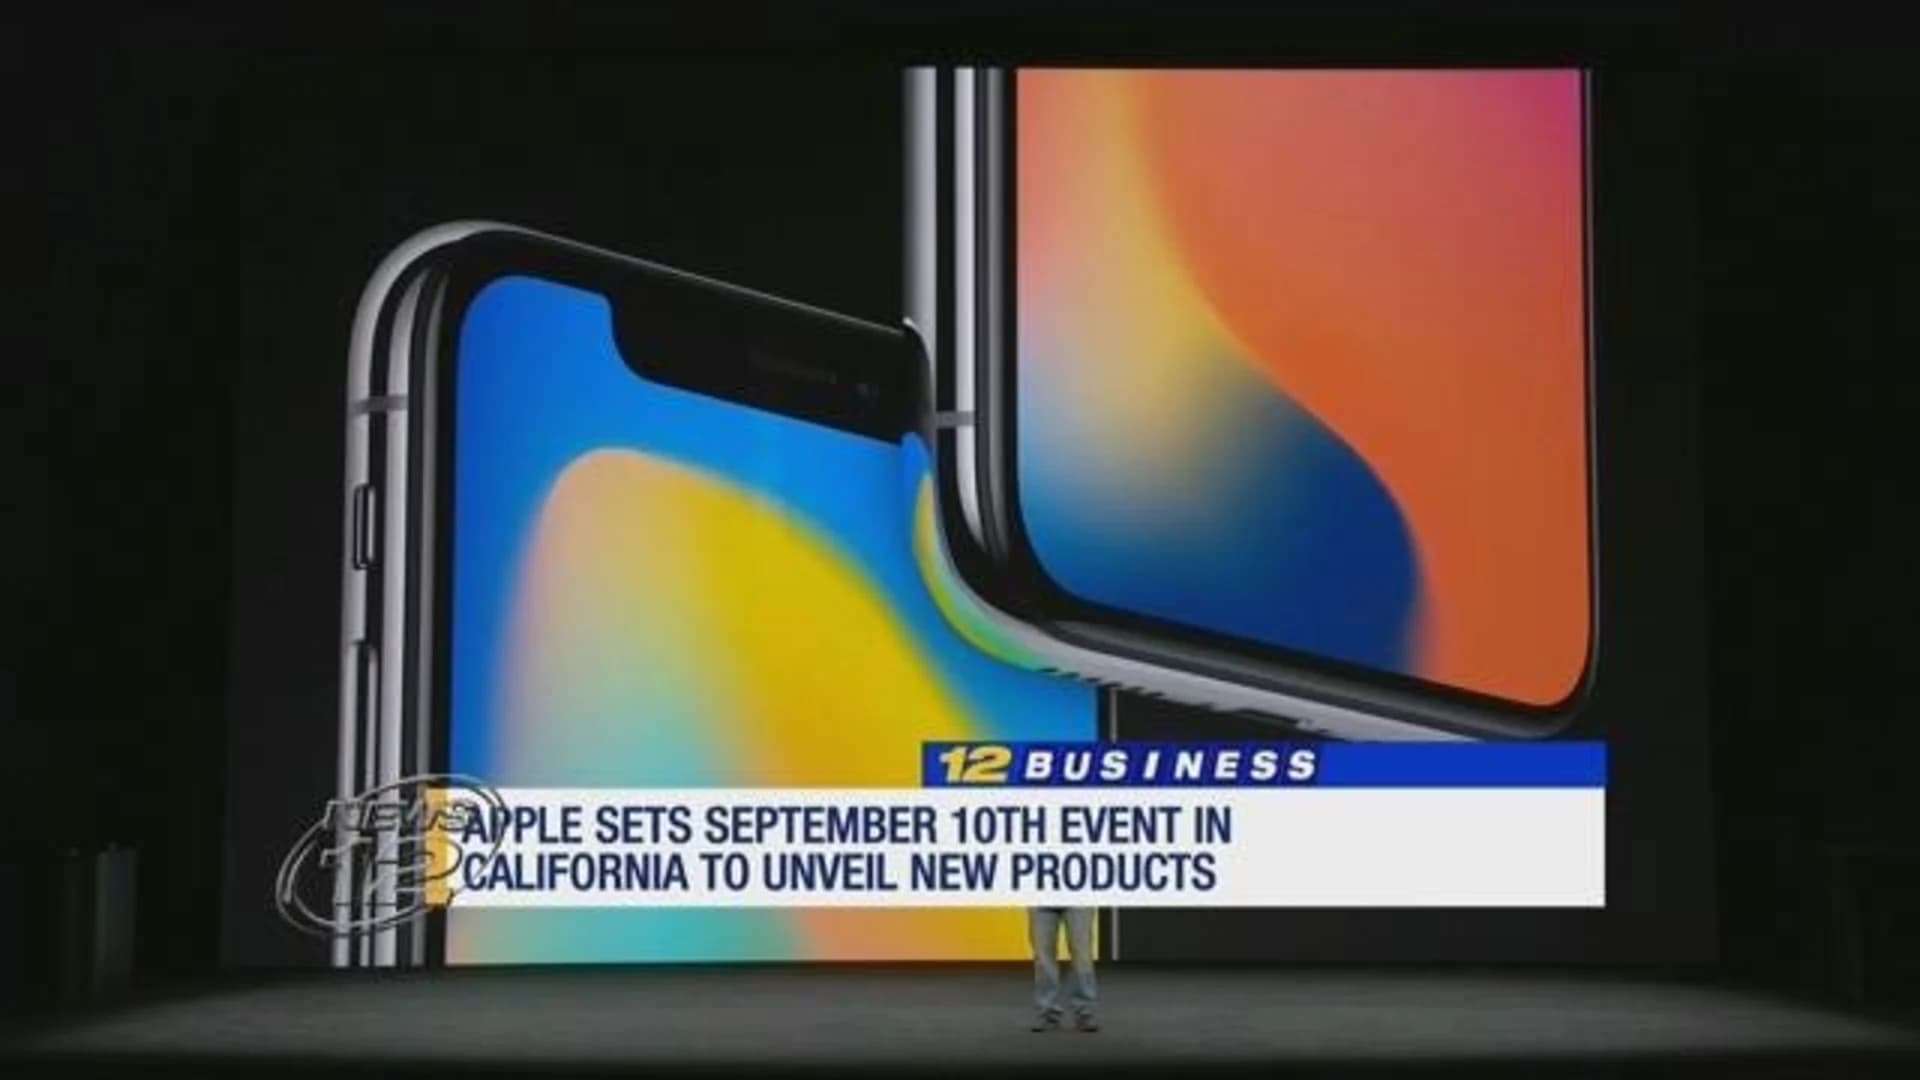 Apple expected to unveil 3 new iPhones